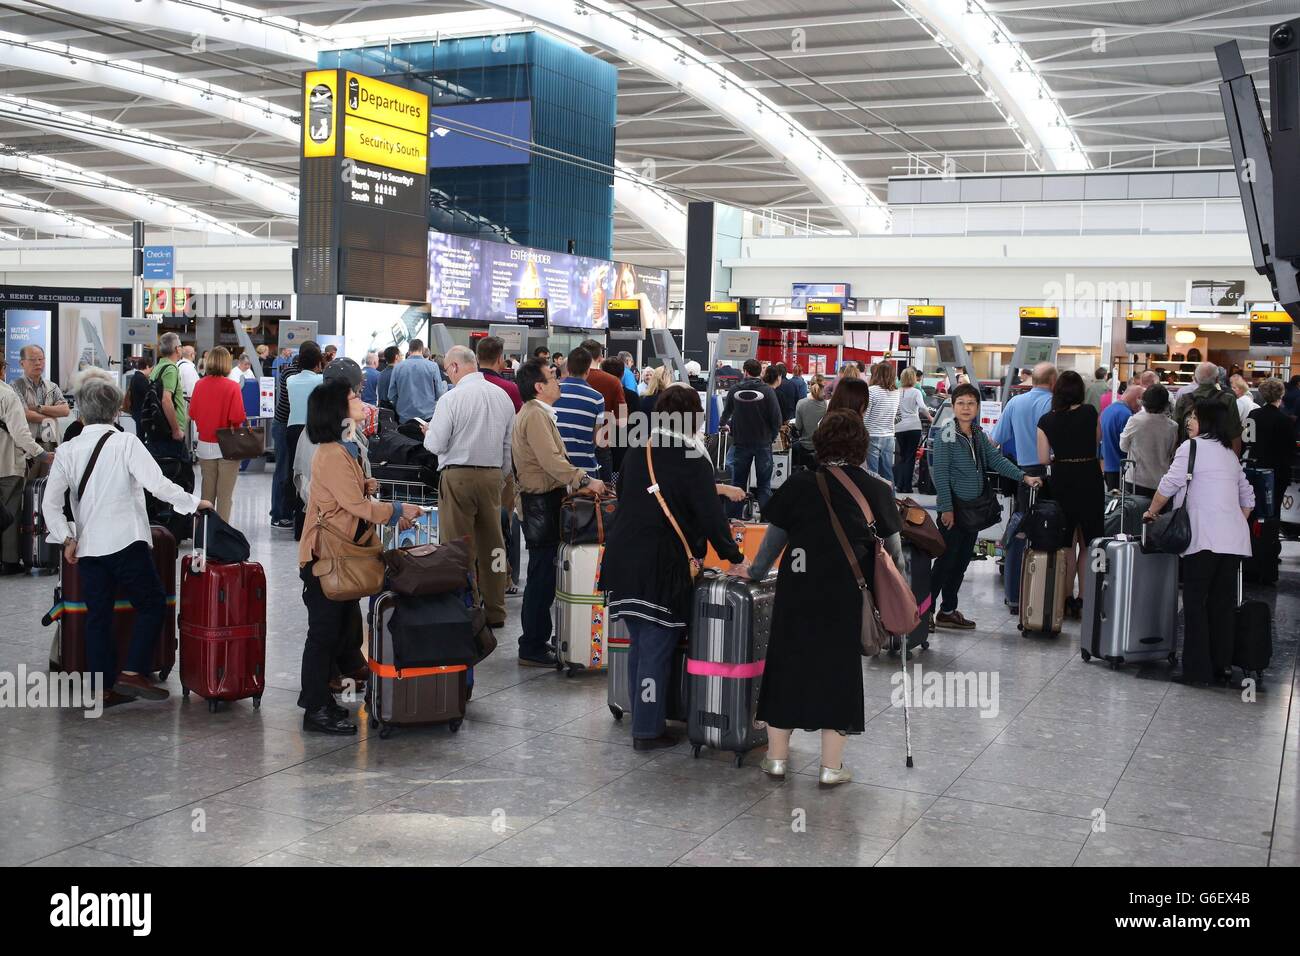 Queues form as British Airways' passengers with check-in luggage were unable to fly from Heathrow's Terminal 5 (T5) due to a computer problem. Stock Photo